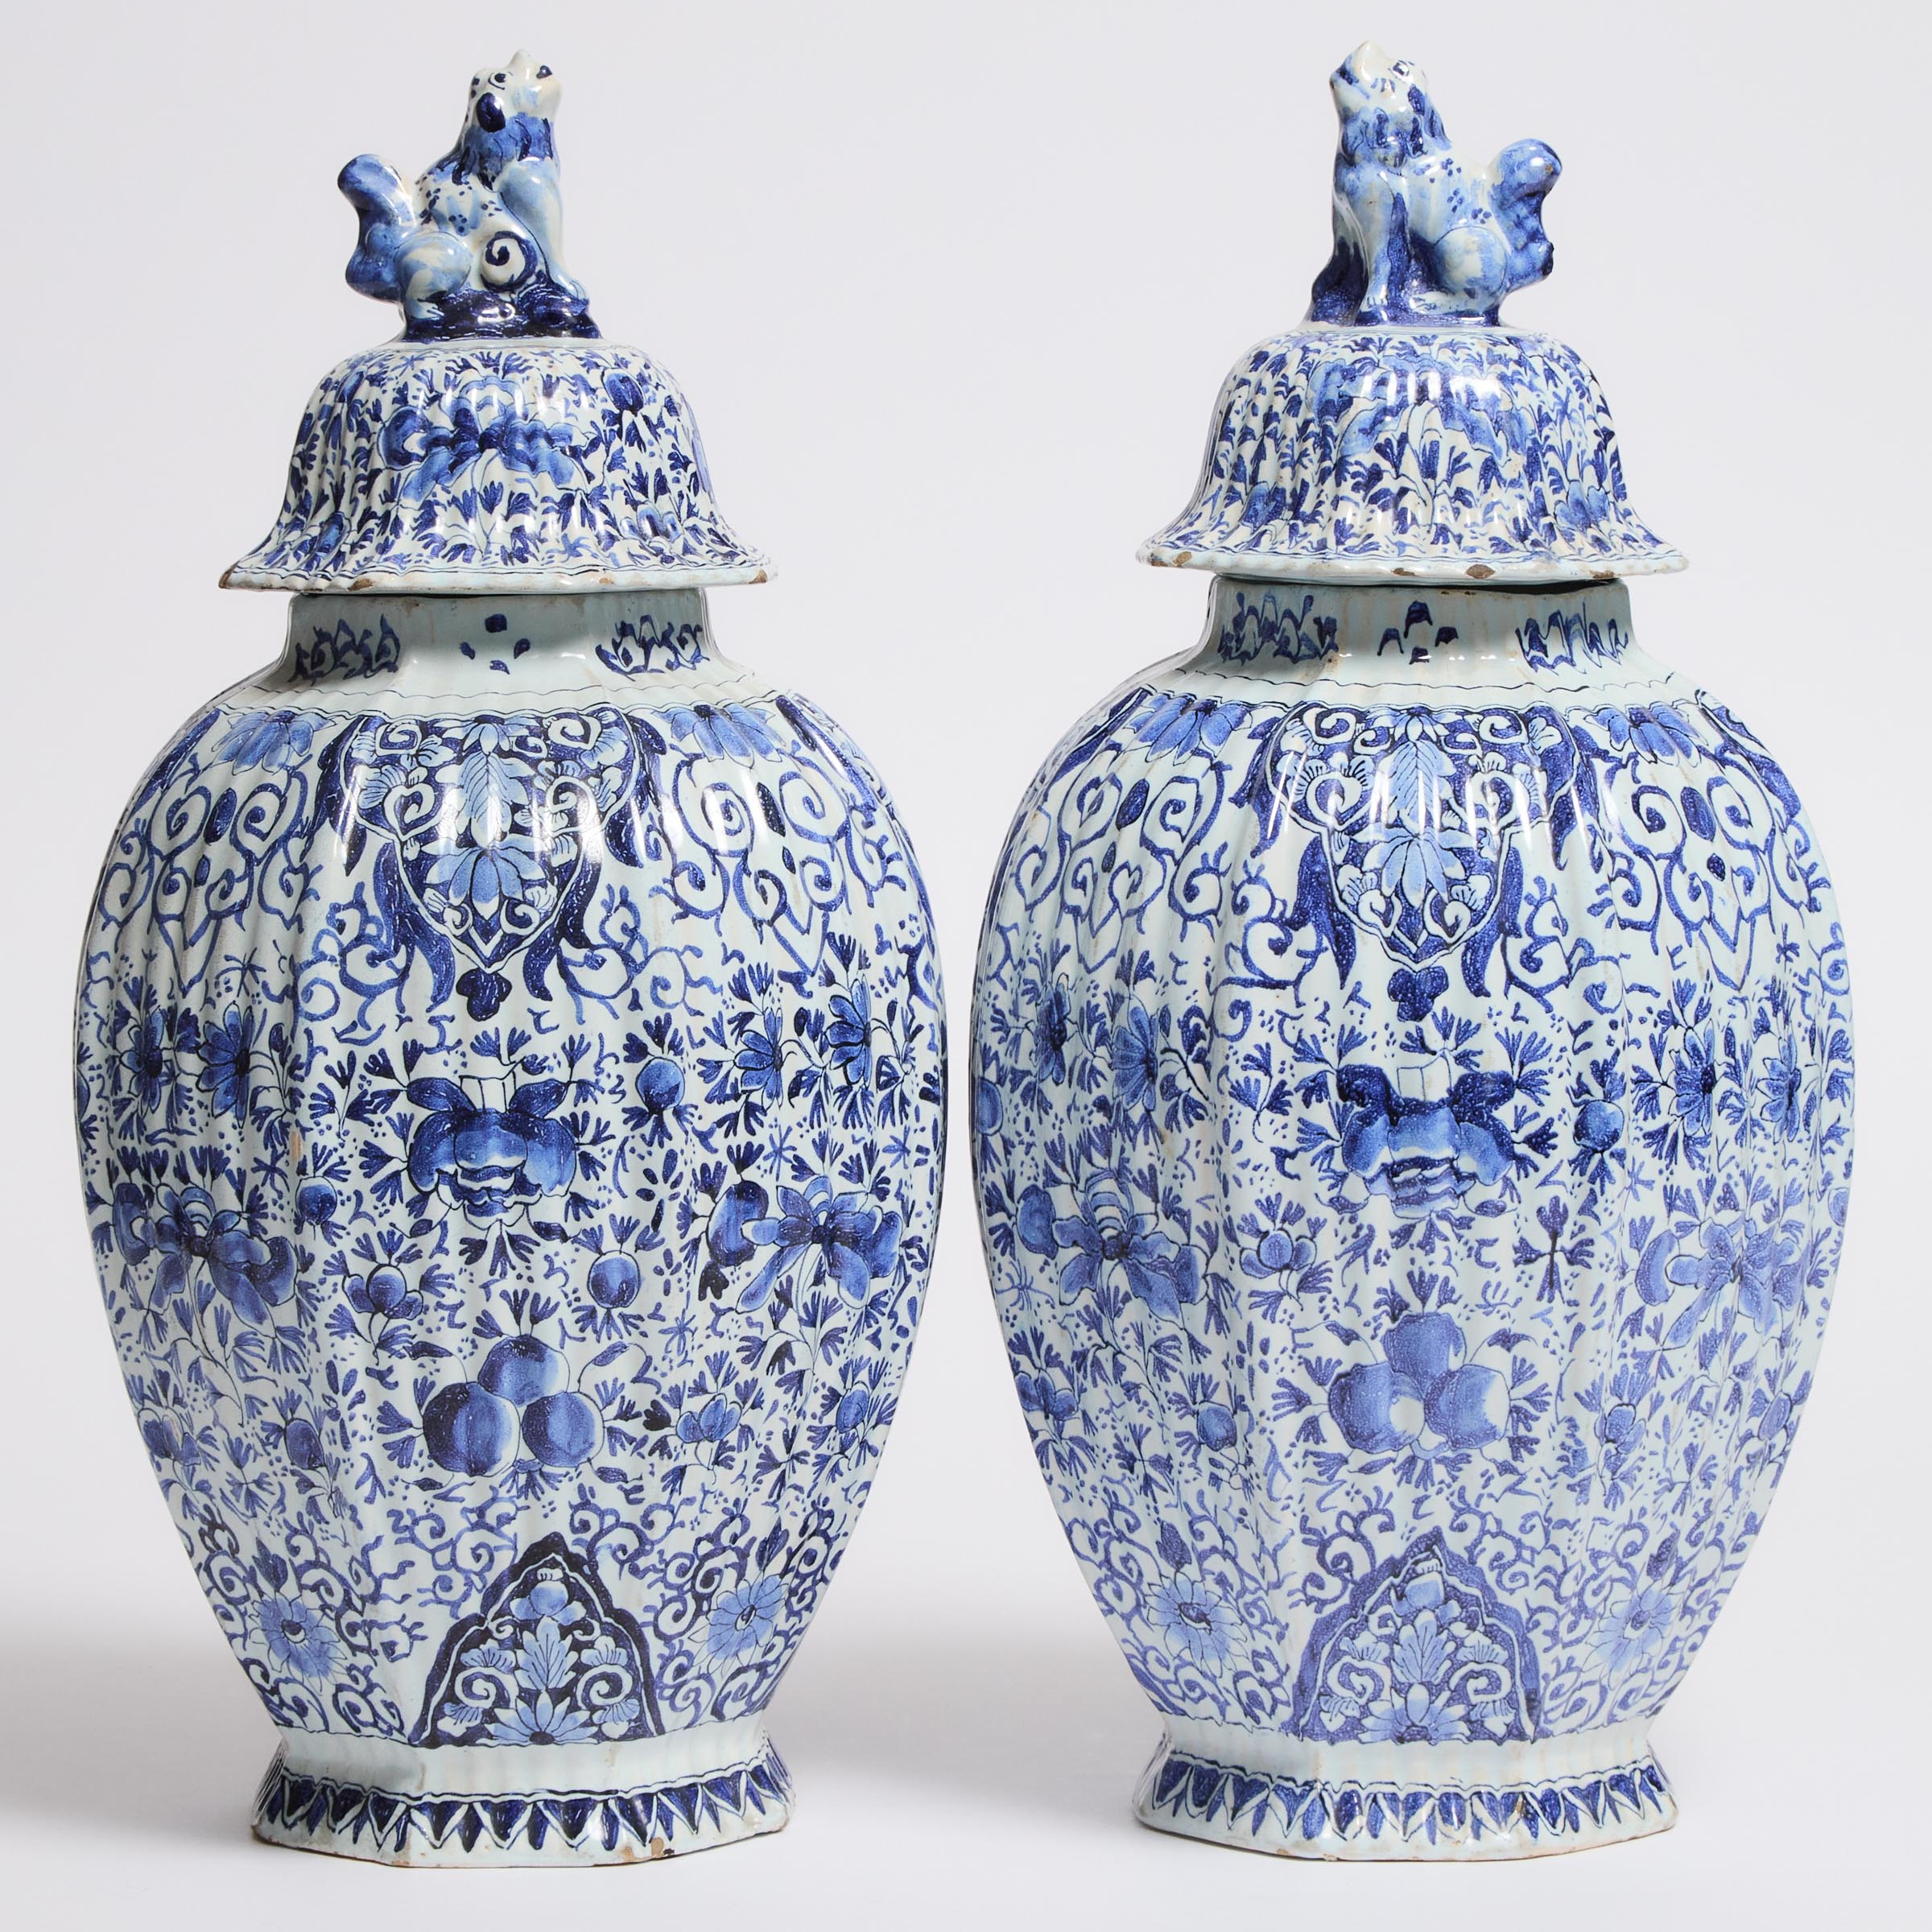 Pair of Delft Blue and White Fluted